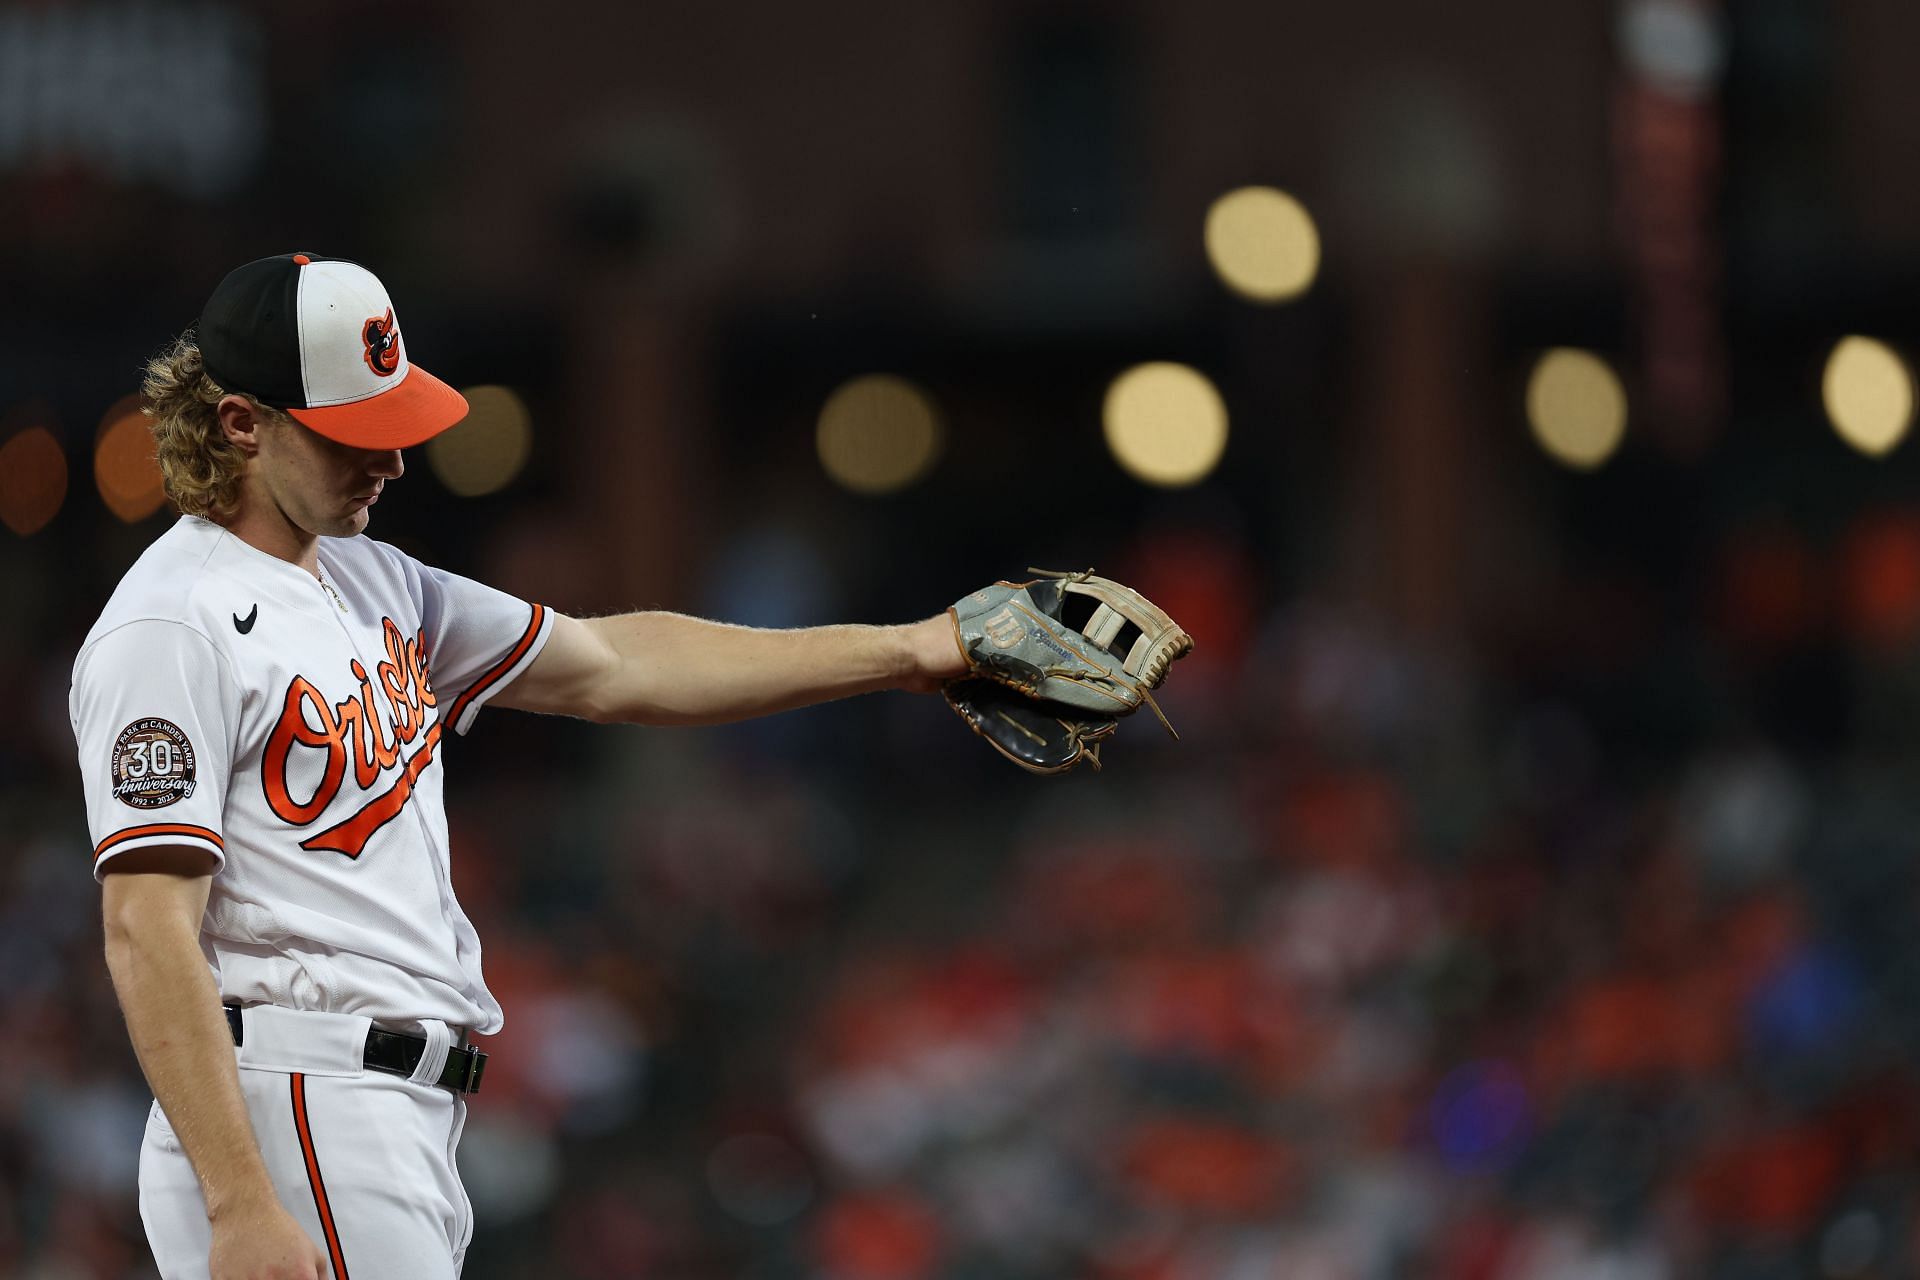 MONDAY M.O. – Orioles strike out on Camden Yards' unexpected renovations